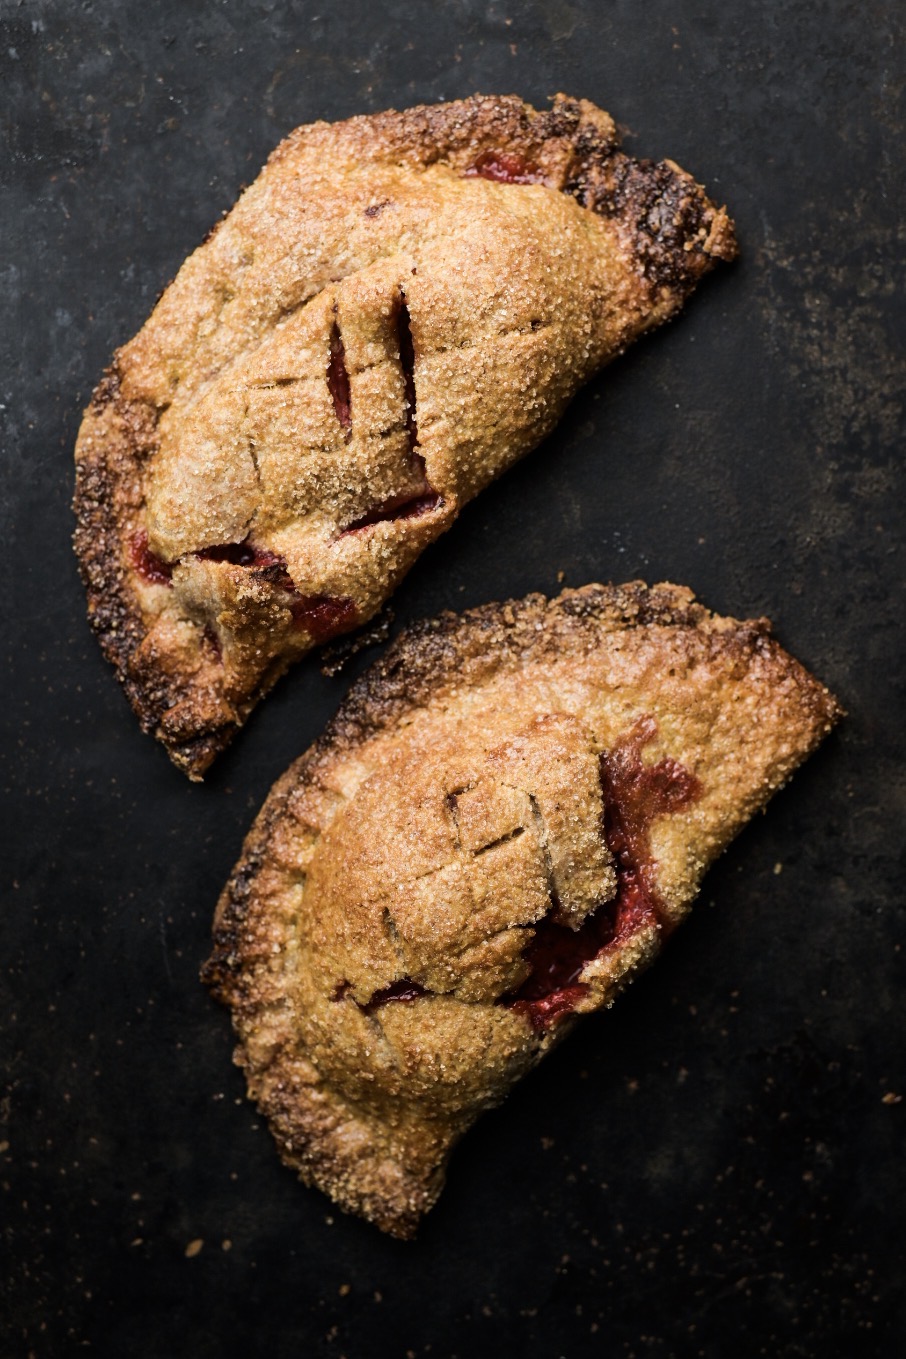 Strawberry hand pies from Mosquito Supper Club